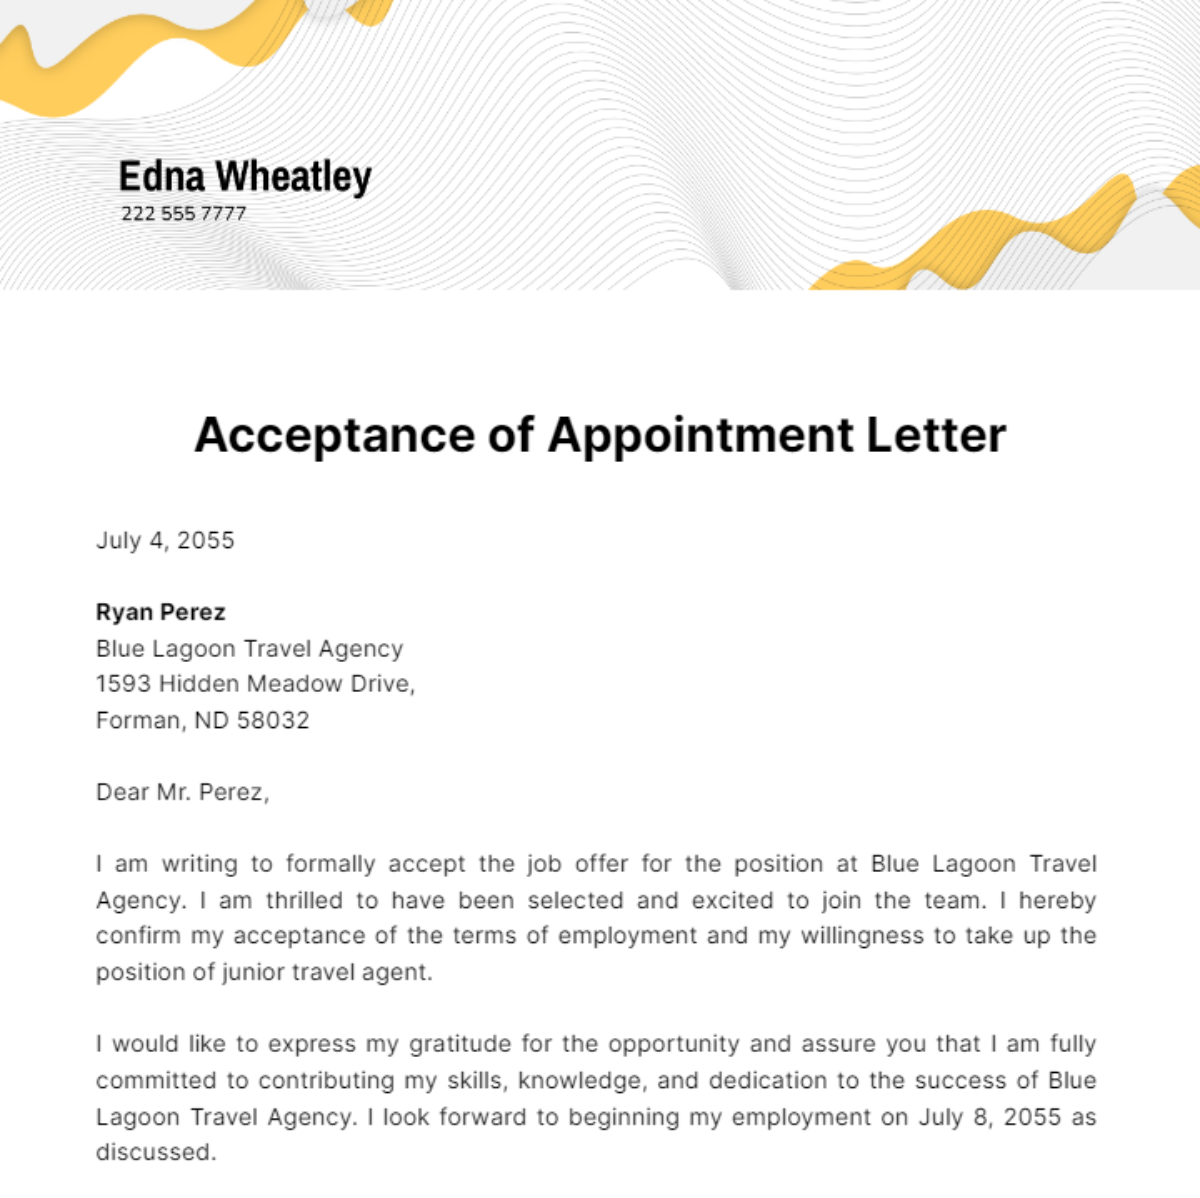 Free Acceptance of Appointment Letter Template